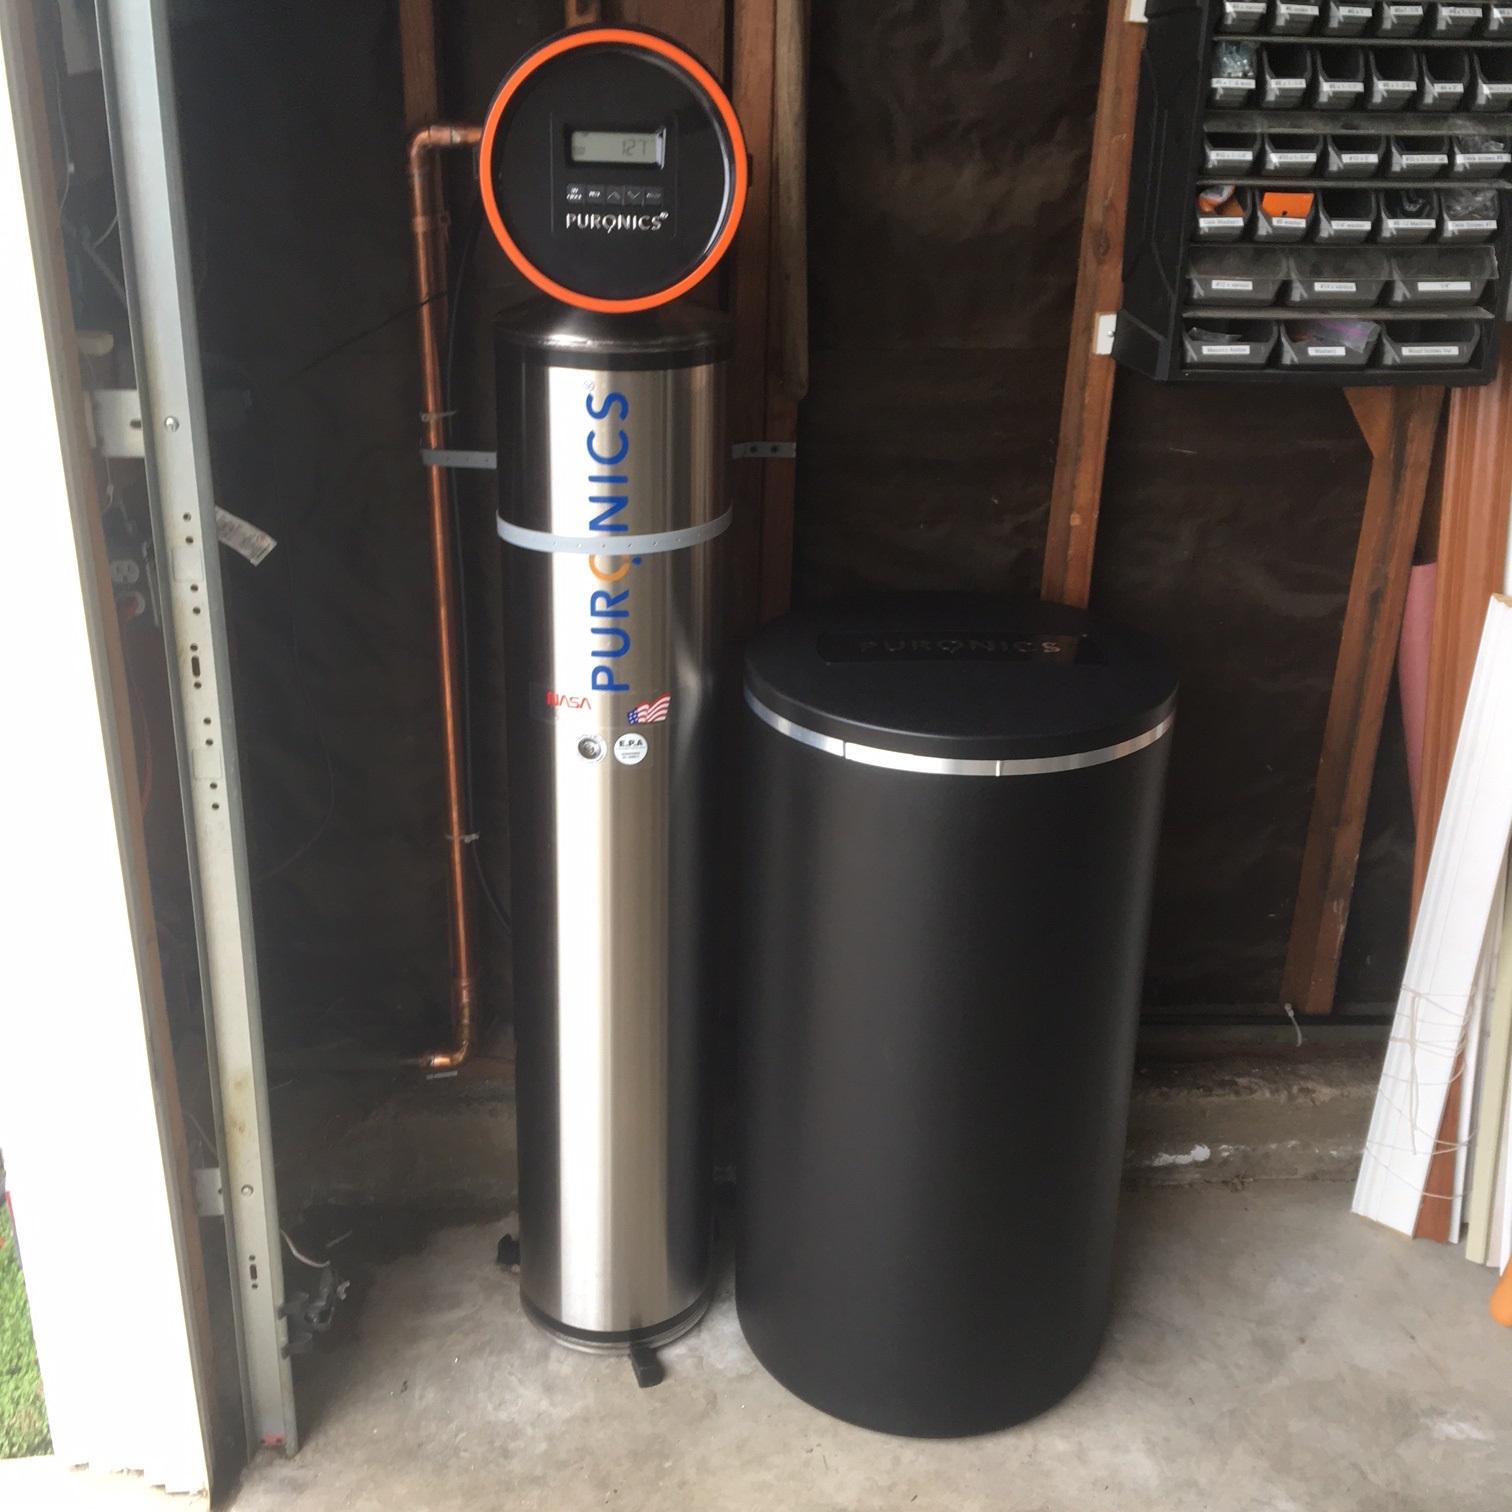 Picture of Puronics installed this Terminator® whole-house water system in a customer's garage. - Puronics, LLC